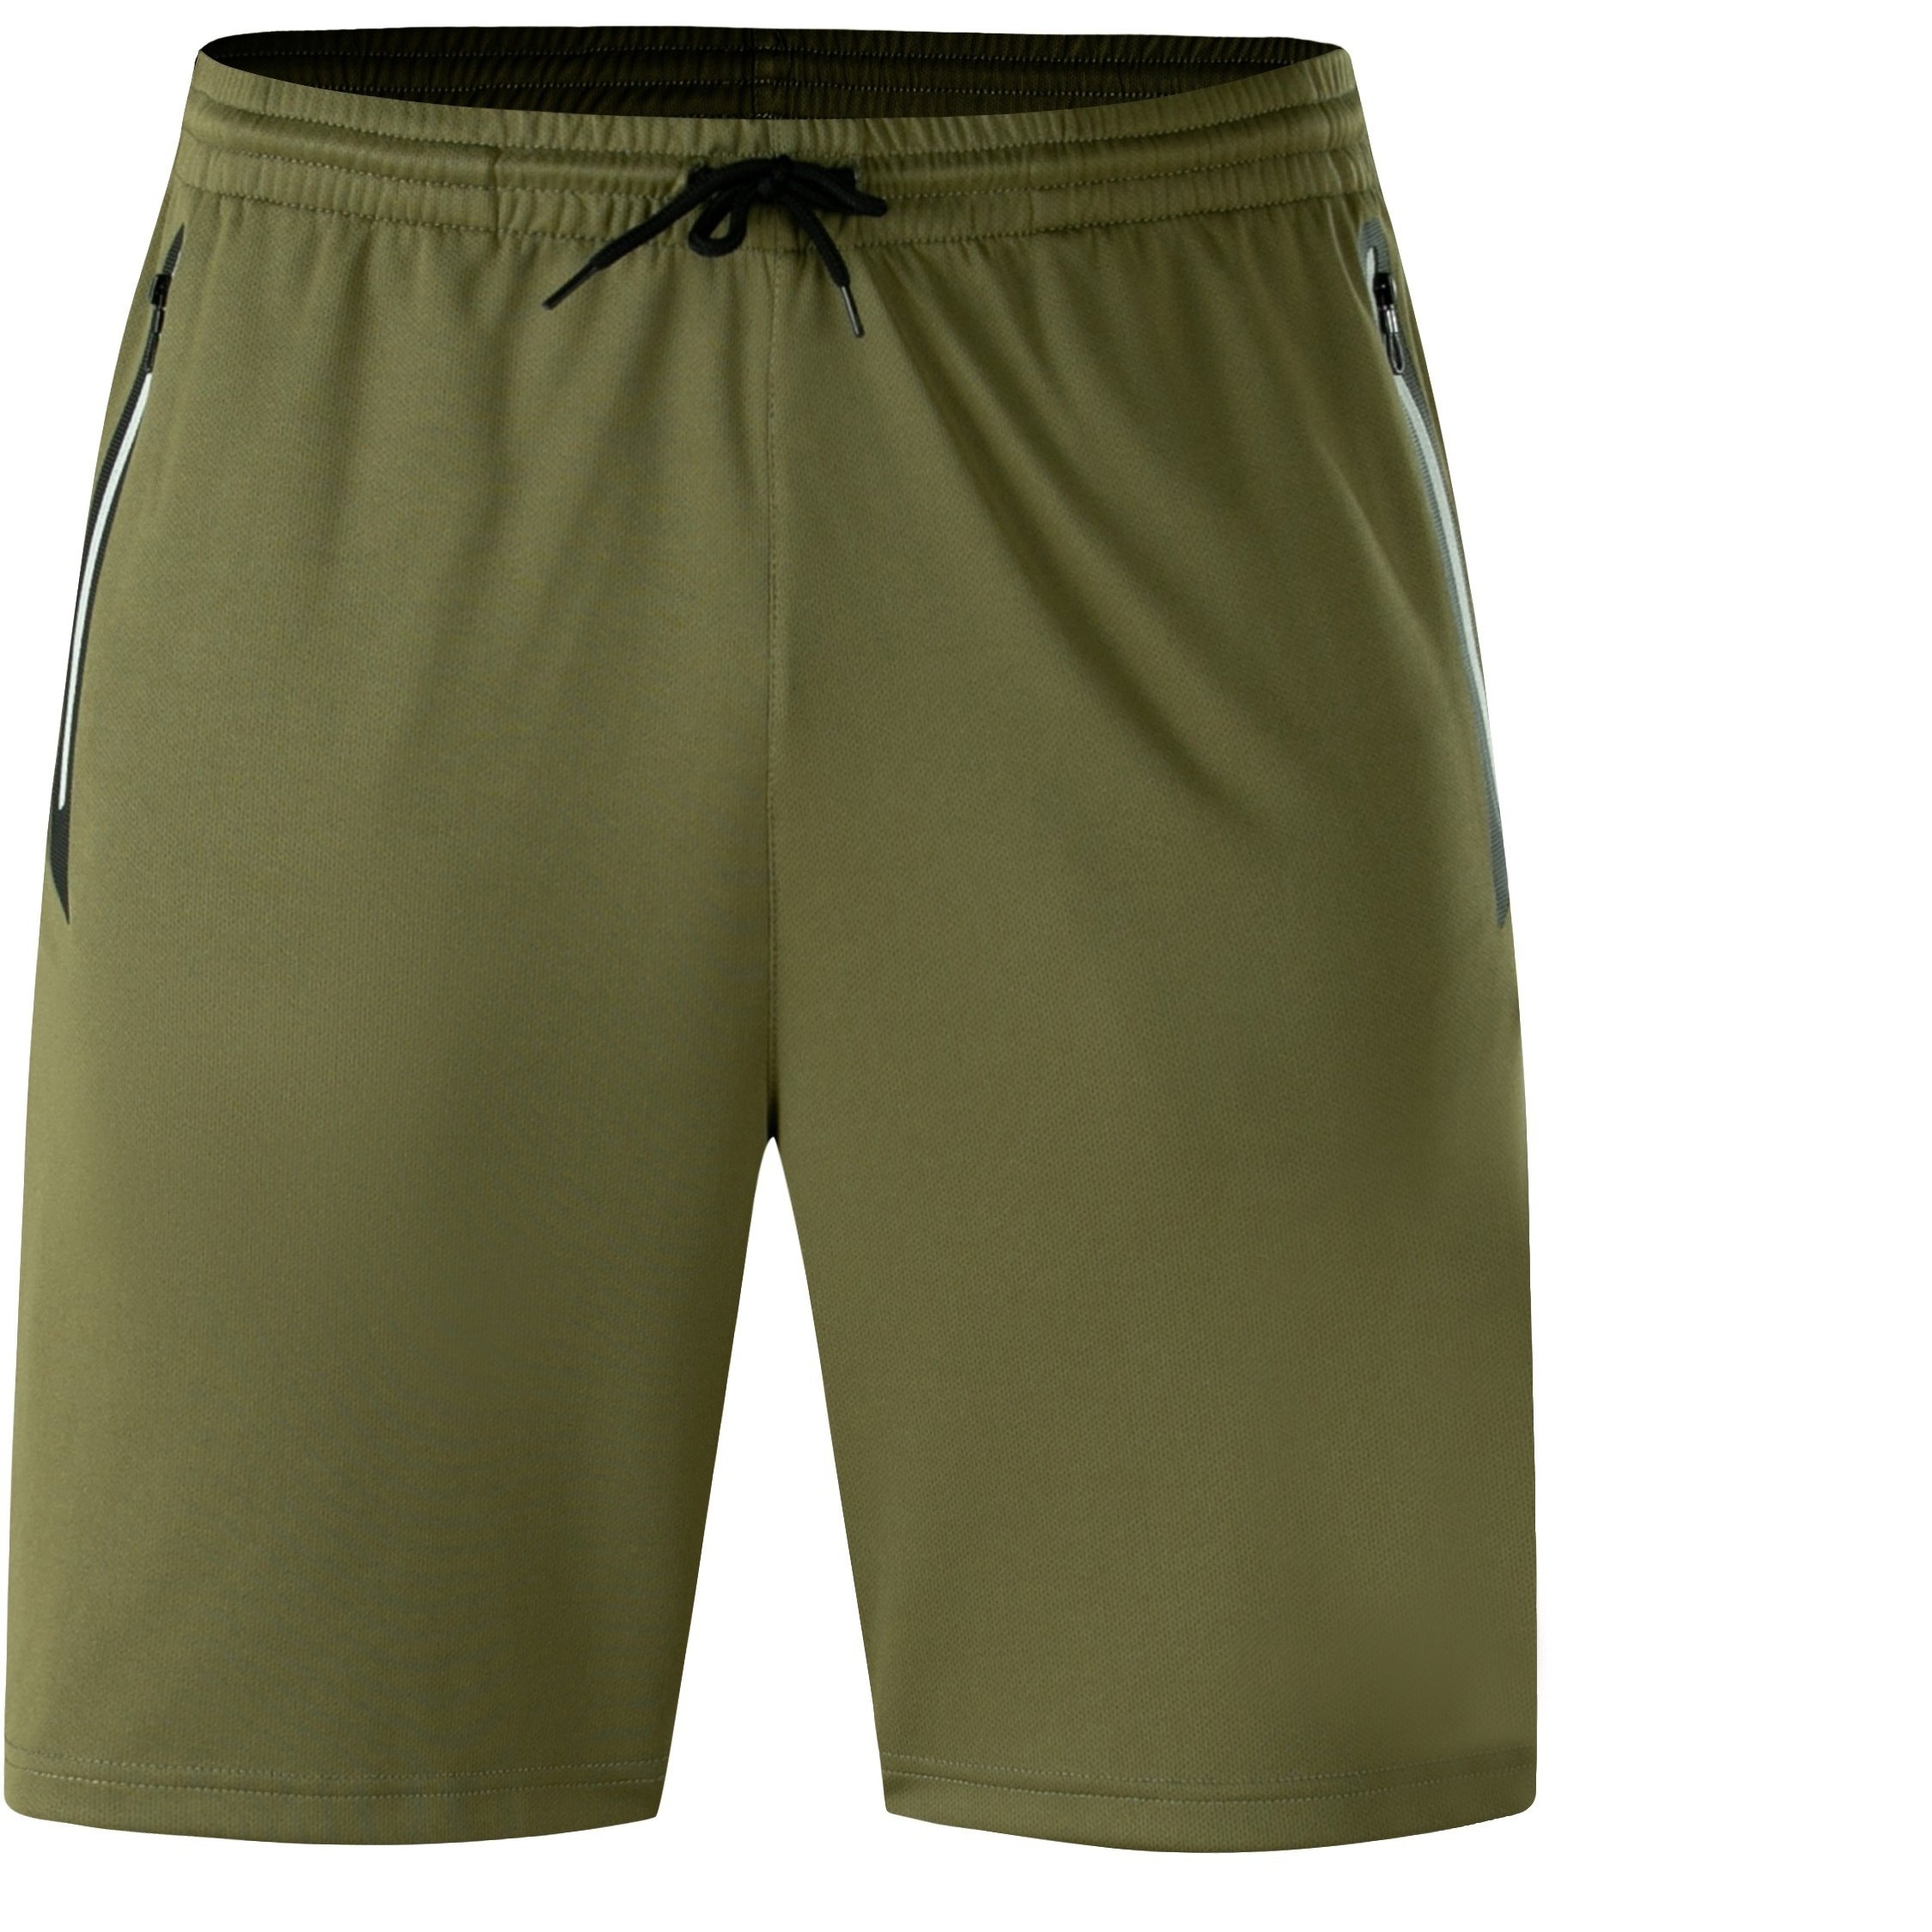 Male Active 9 shorts - Olive